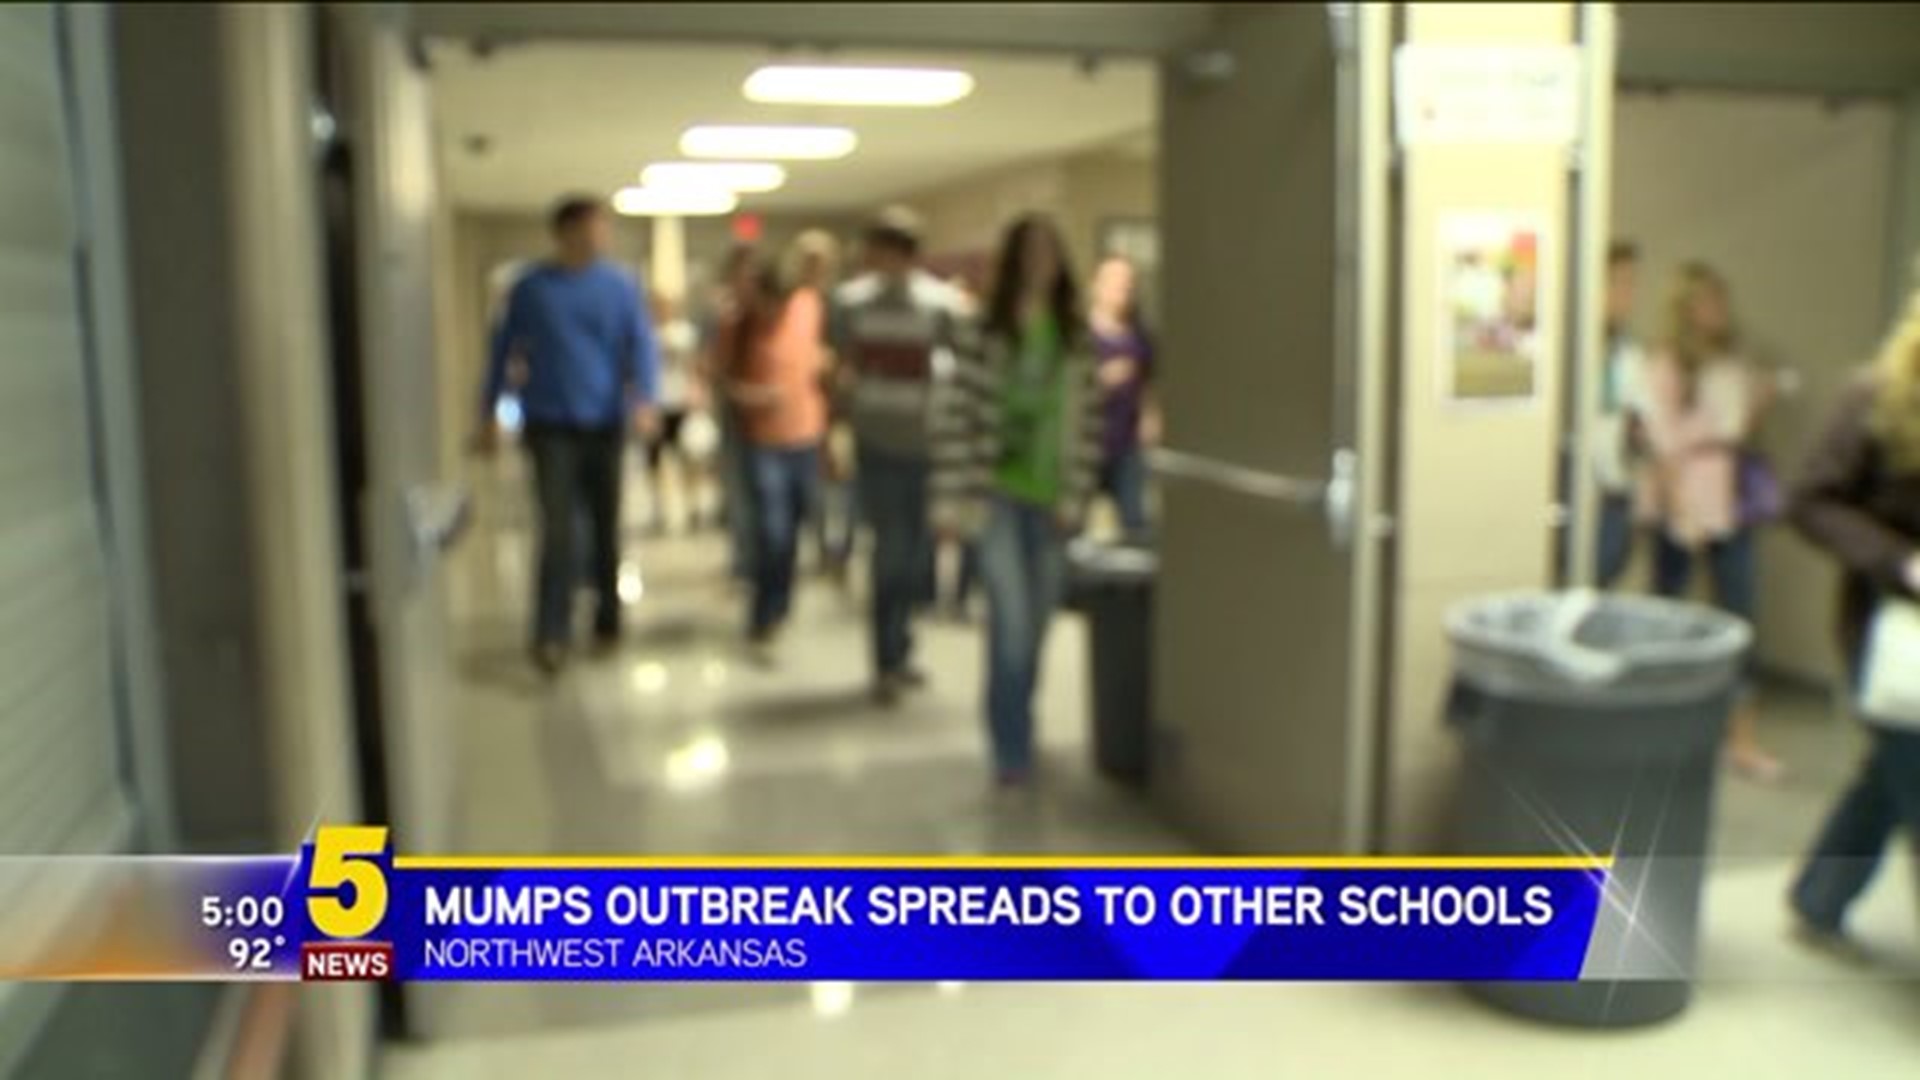 MUMPS OUTBREAK SPREADS TO ROGERS